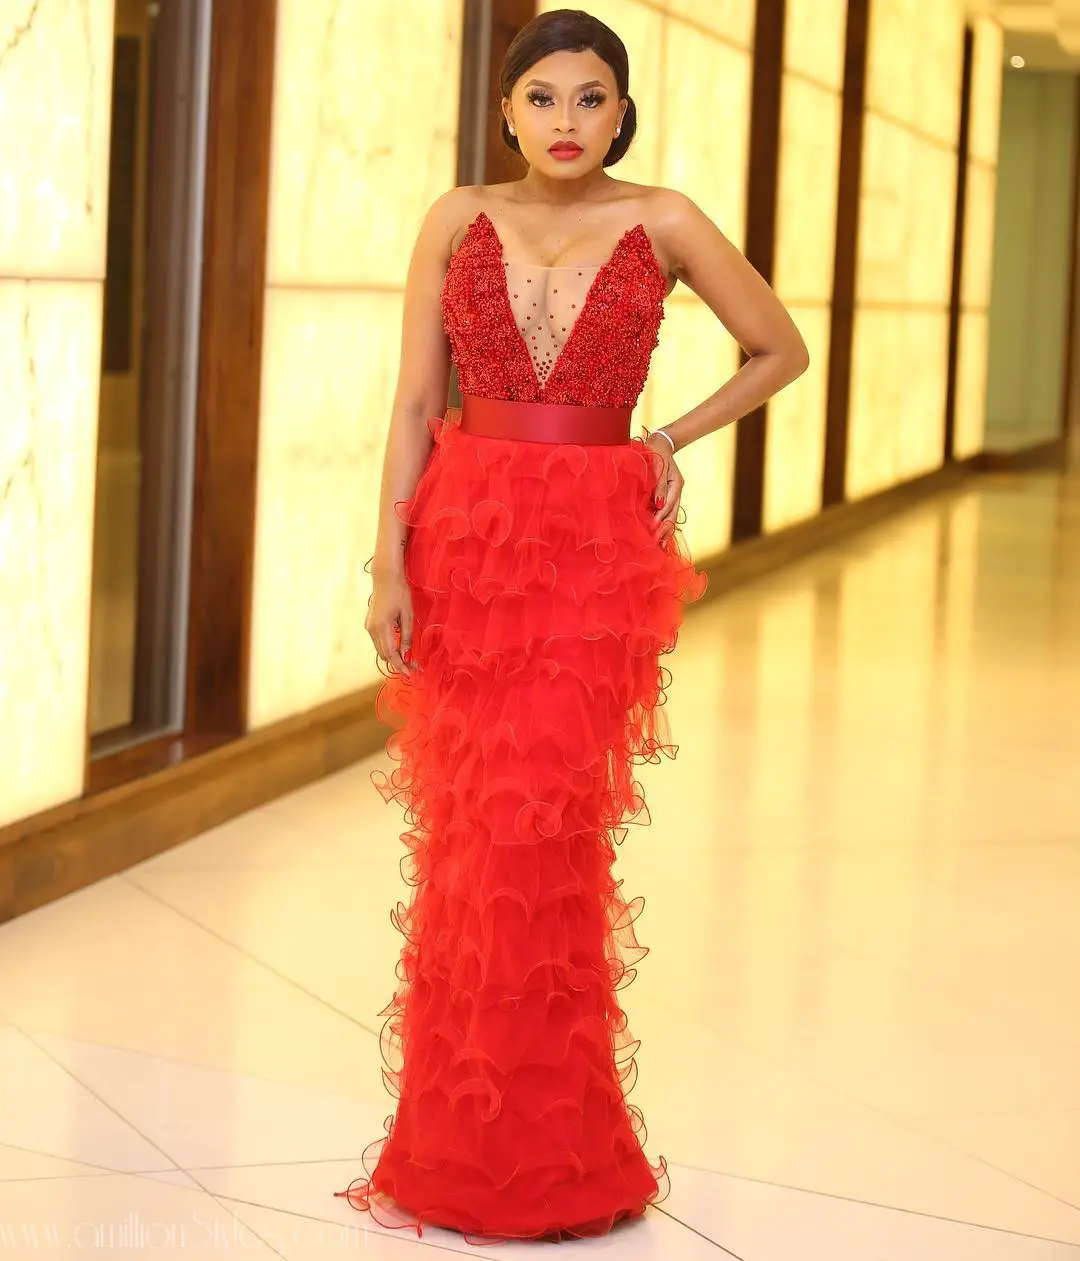 The Best Looks From The 2018 DSTV Mzansi Viewers Choice Award